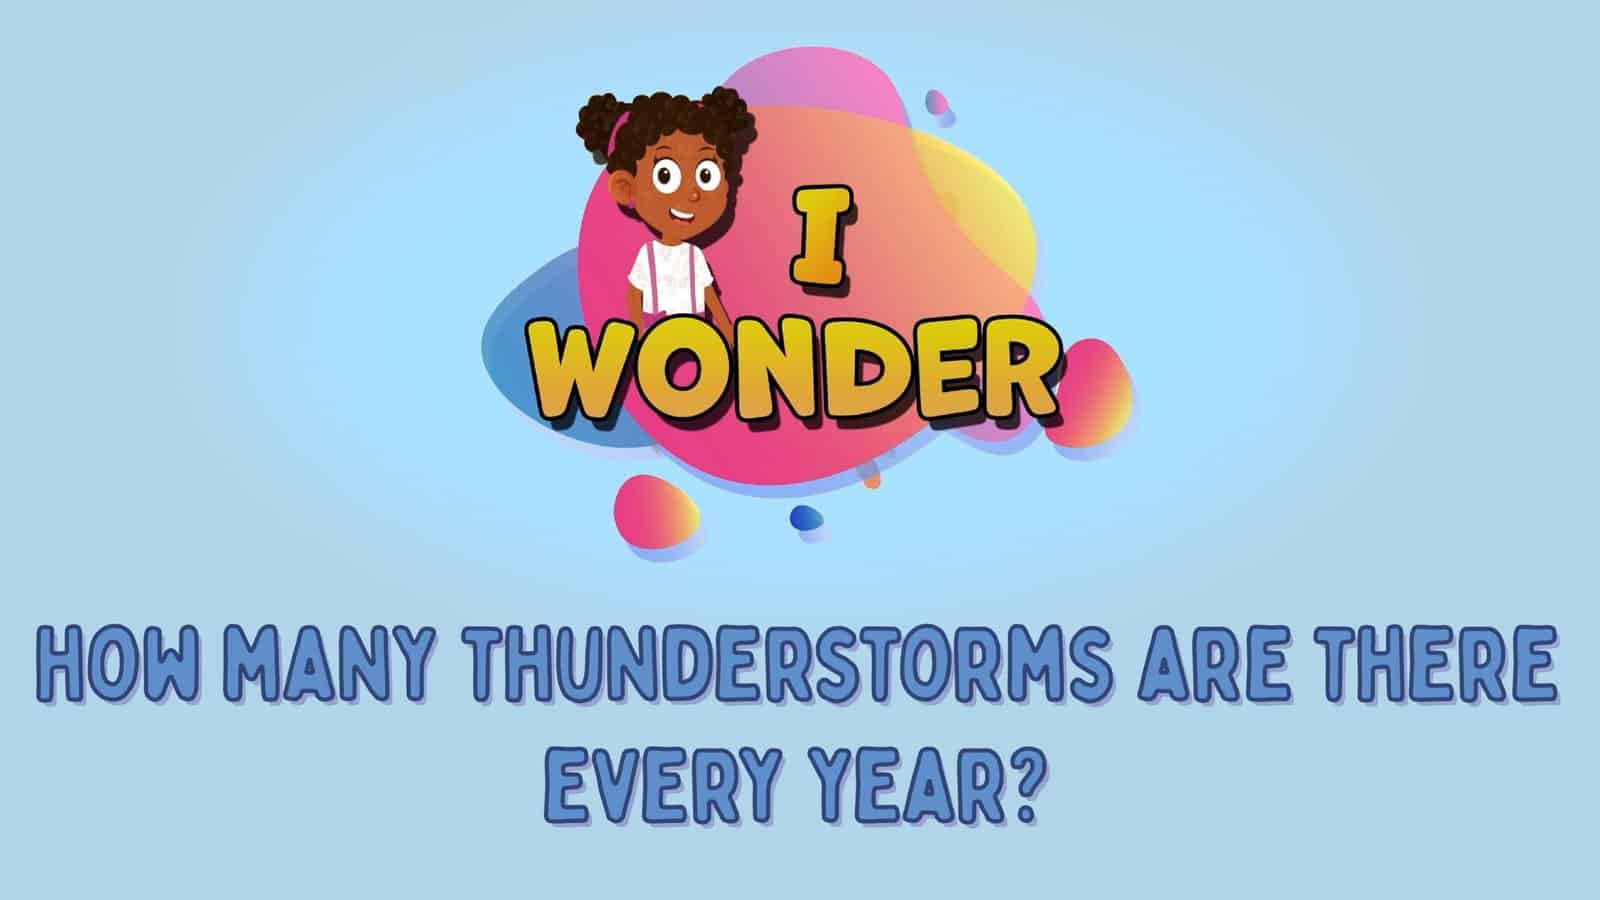 How Many Thunderstorms Are There Every Year?